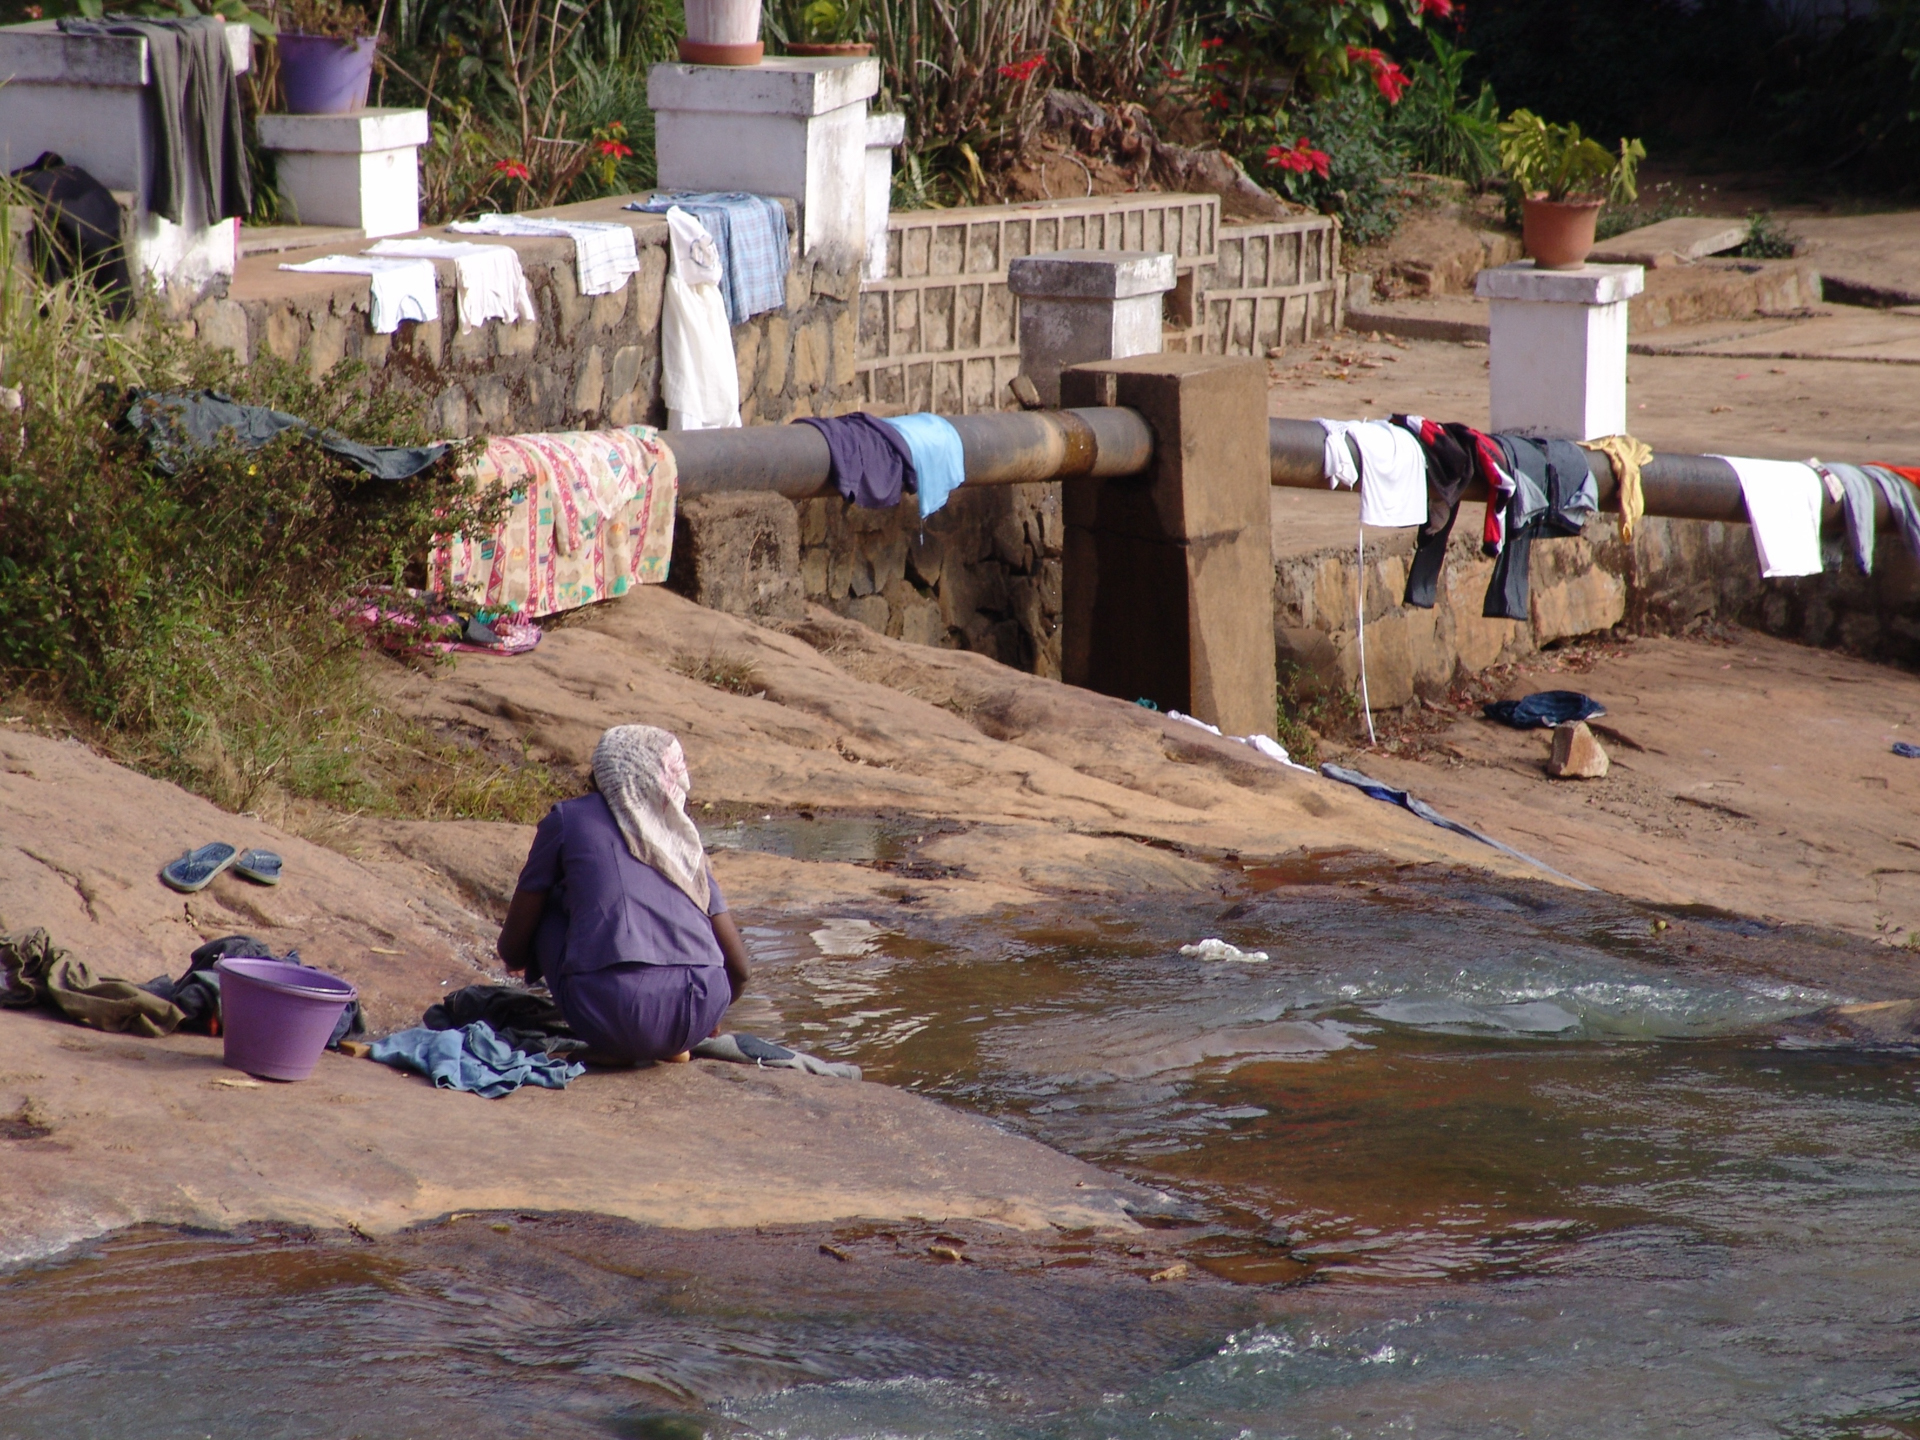 Lady washing her personal belongings along a stream in Madagascar